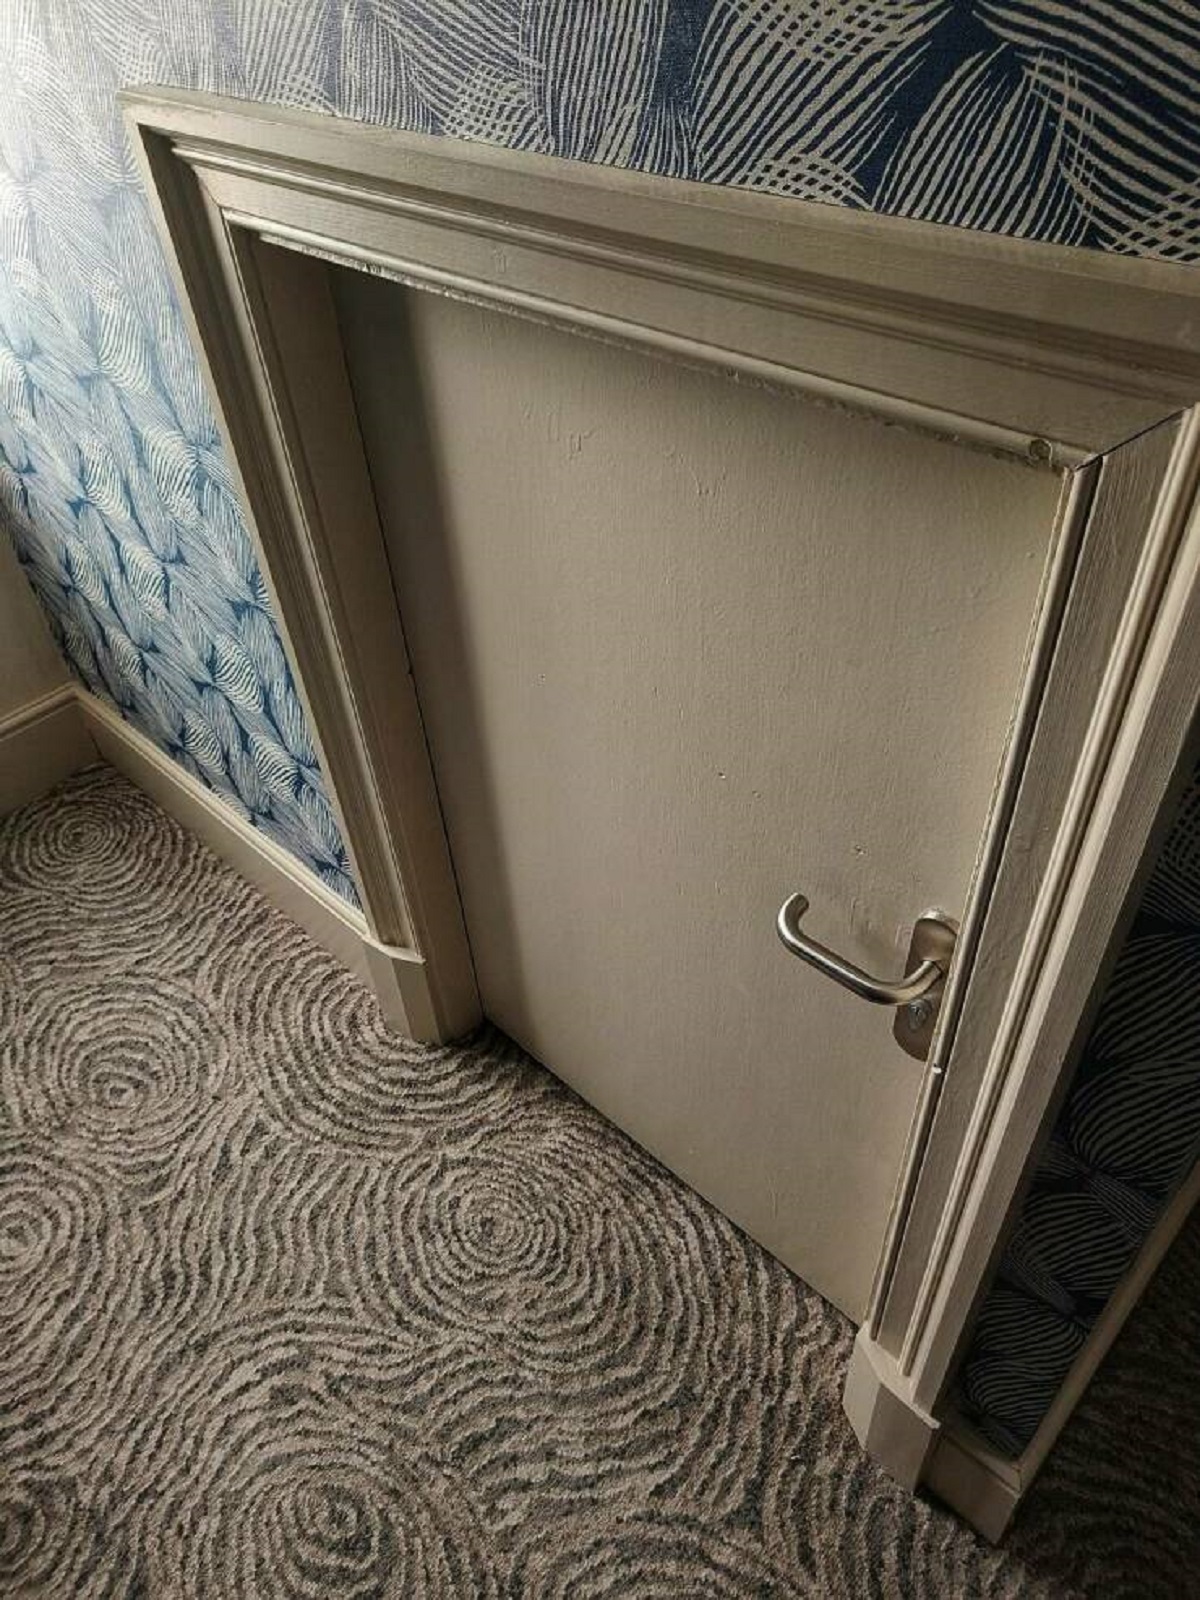 "Staying in a hotel room with a forbidden/locked mini-door that goes deep into the wall..."